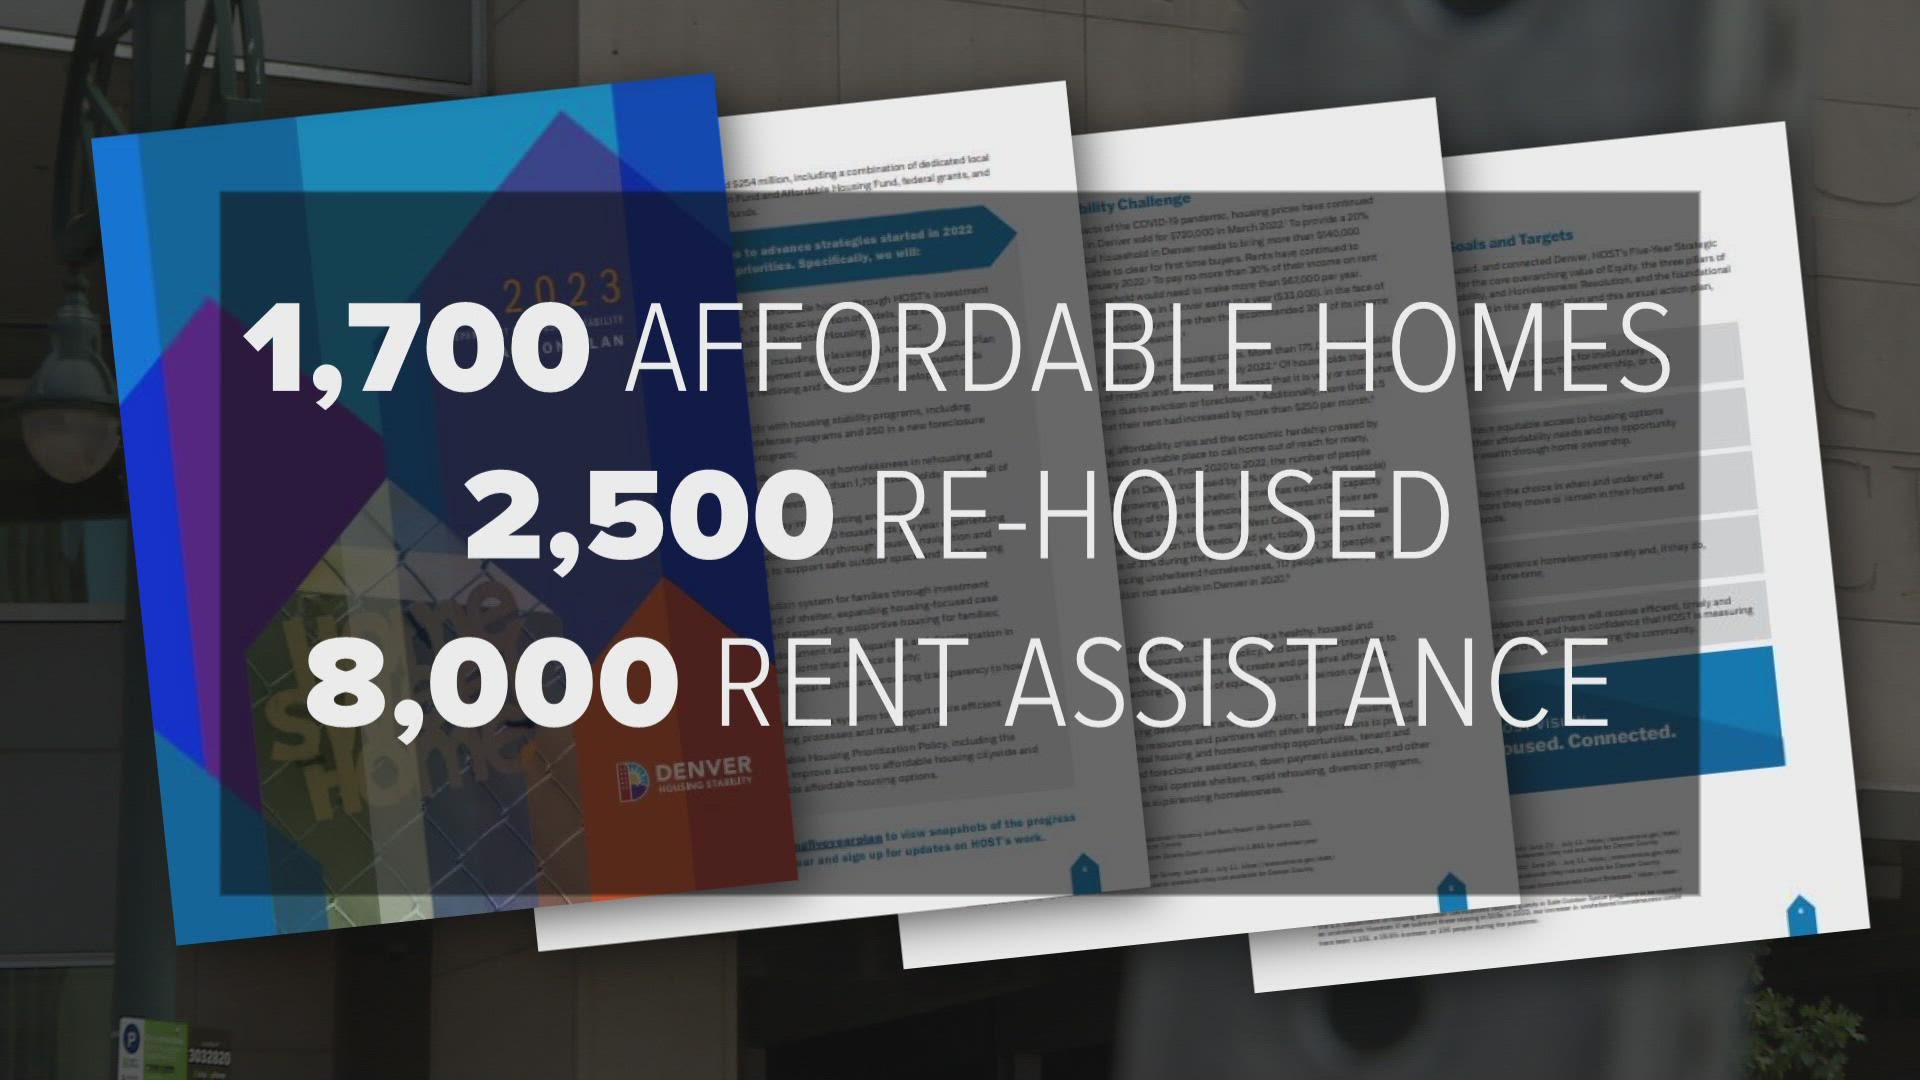 The Denver Dept. of Housing Stability wants to create 1,700 new affordable home and help at least 100 people transition out of encampments.